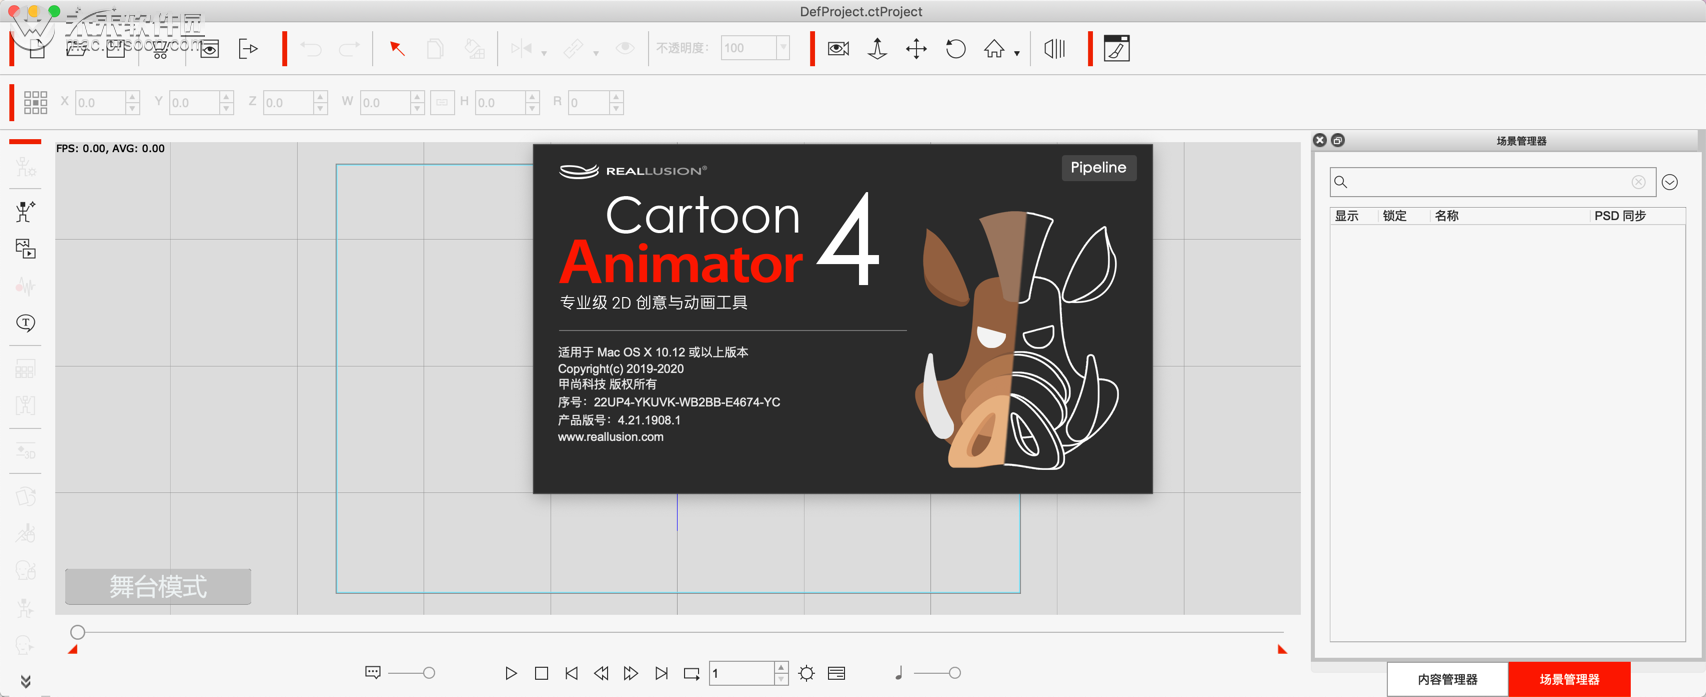 instal the new version for apple Reallusion Cartoon Animator 5.21.2202.1 Pipeline